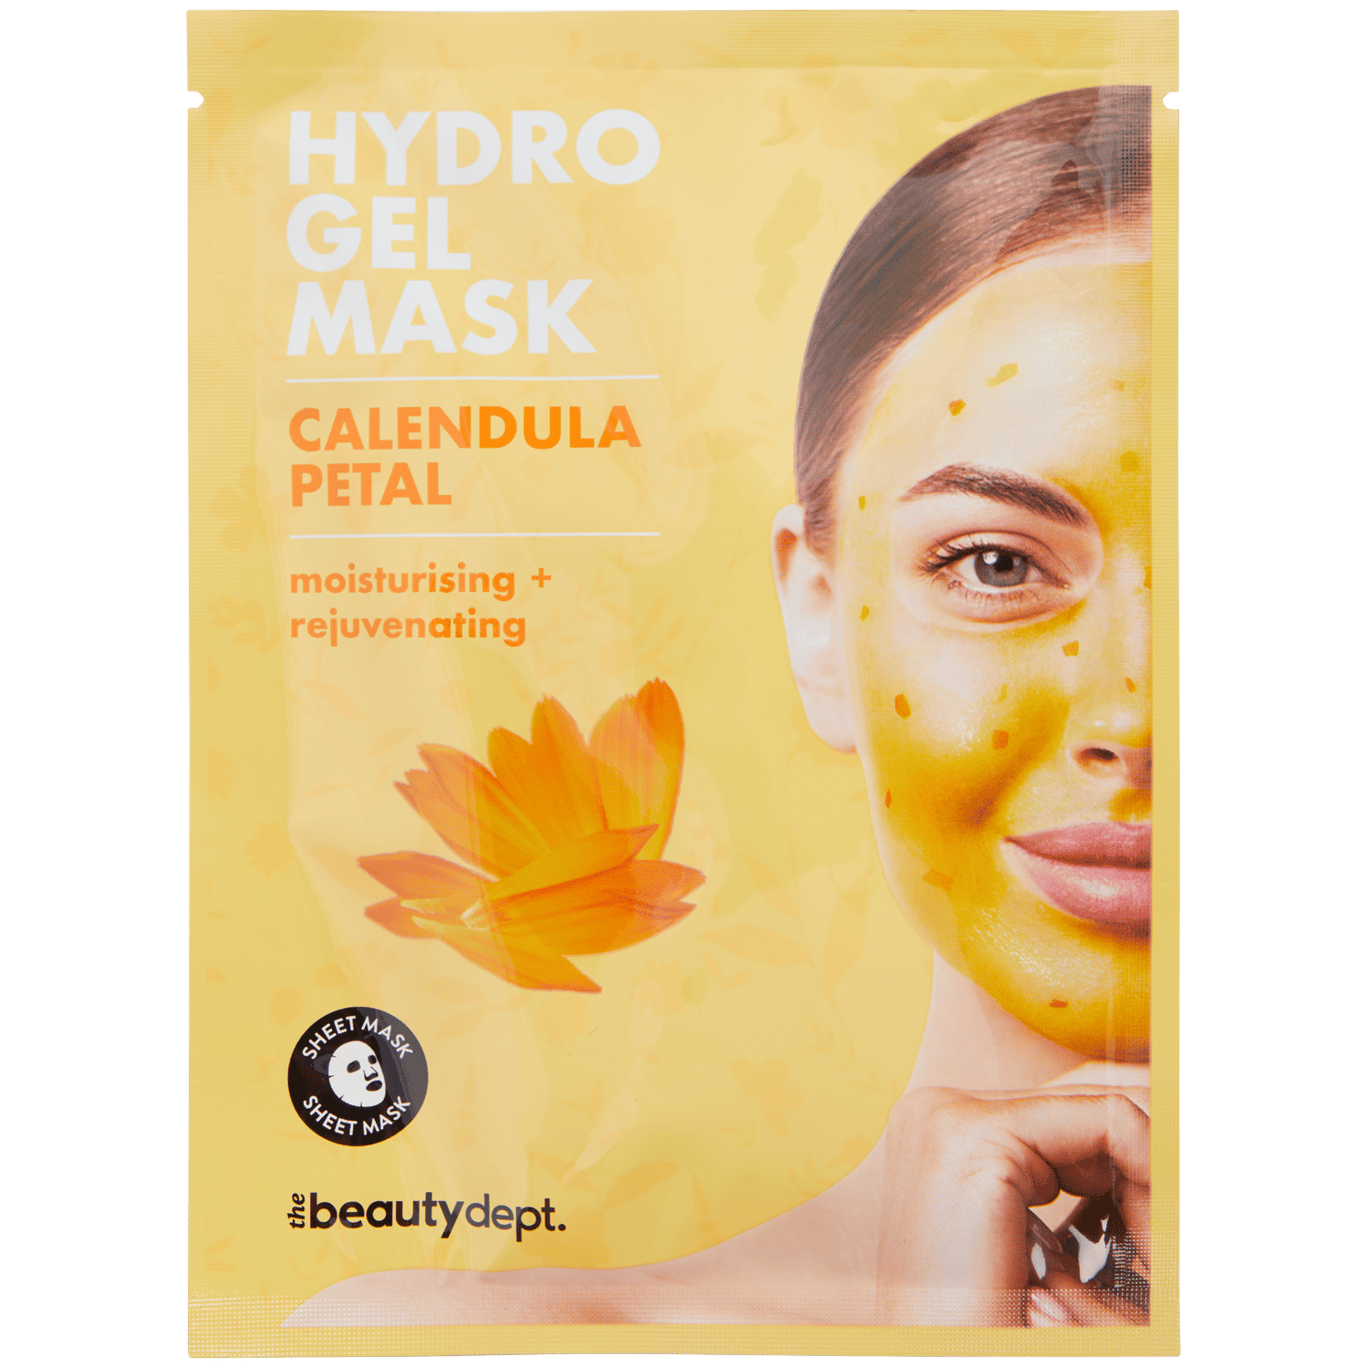 Masque hydrogel The Beauty Dept.